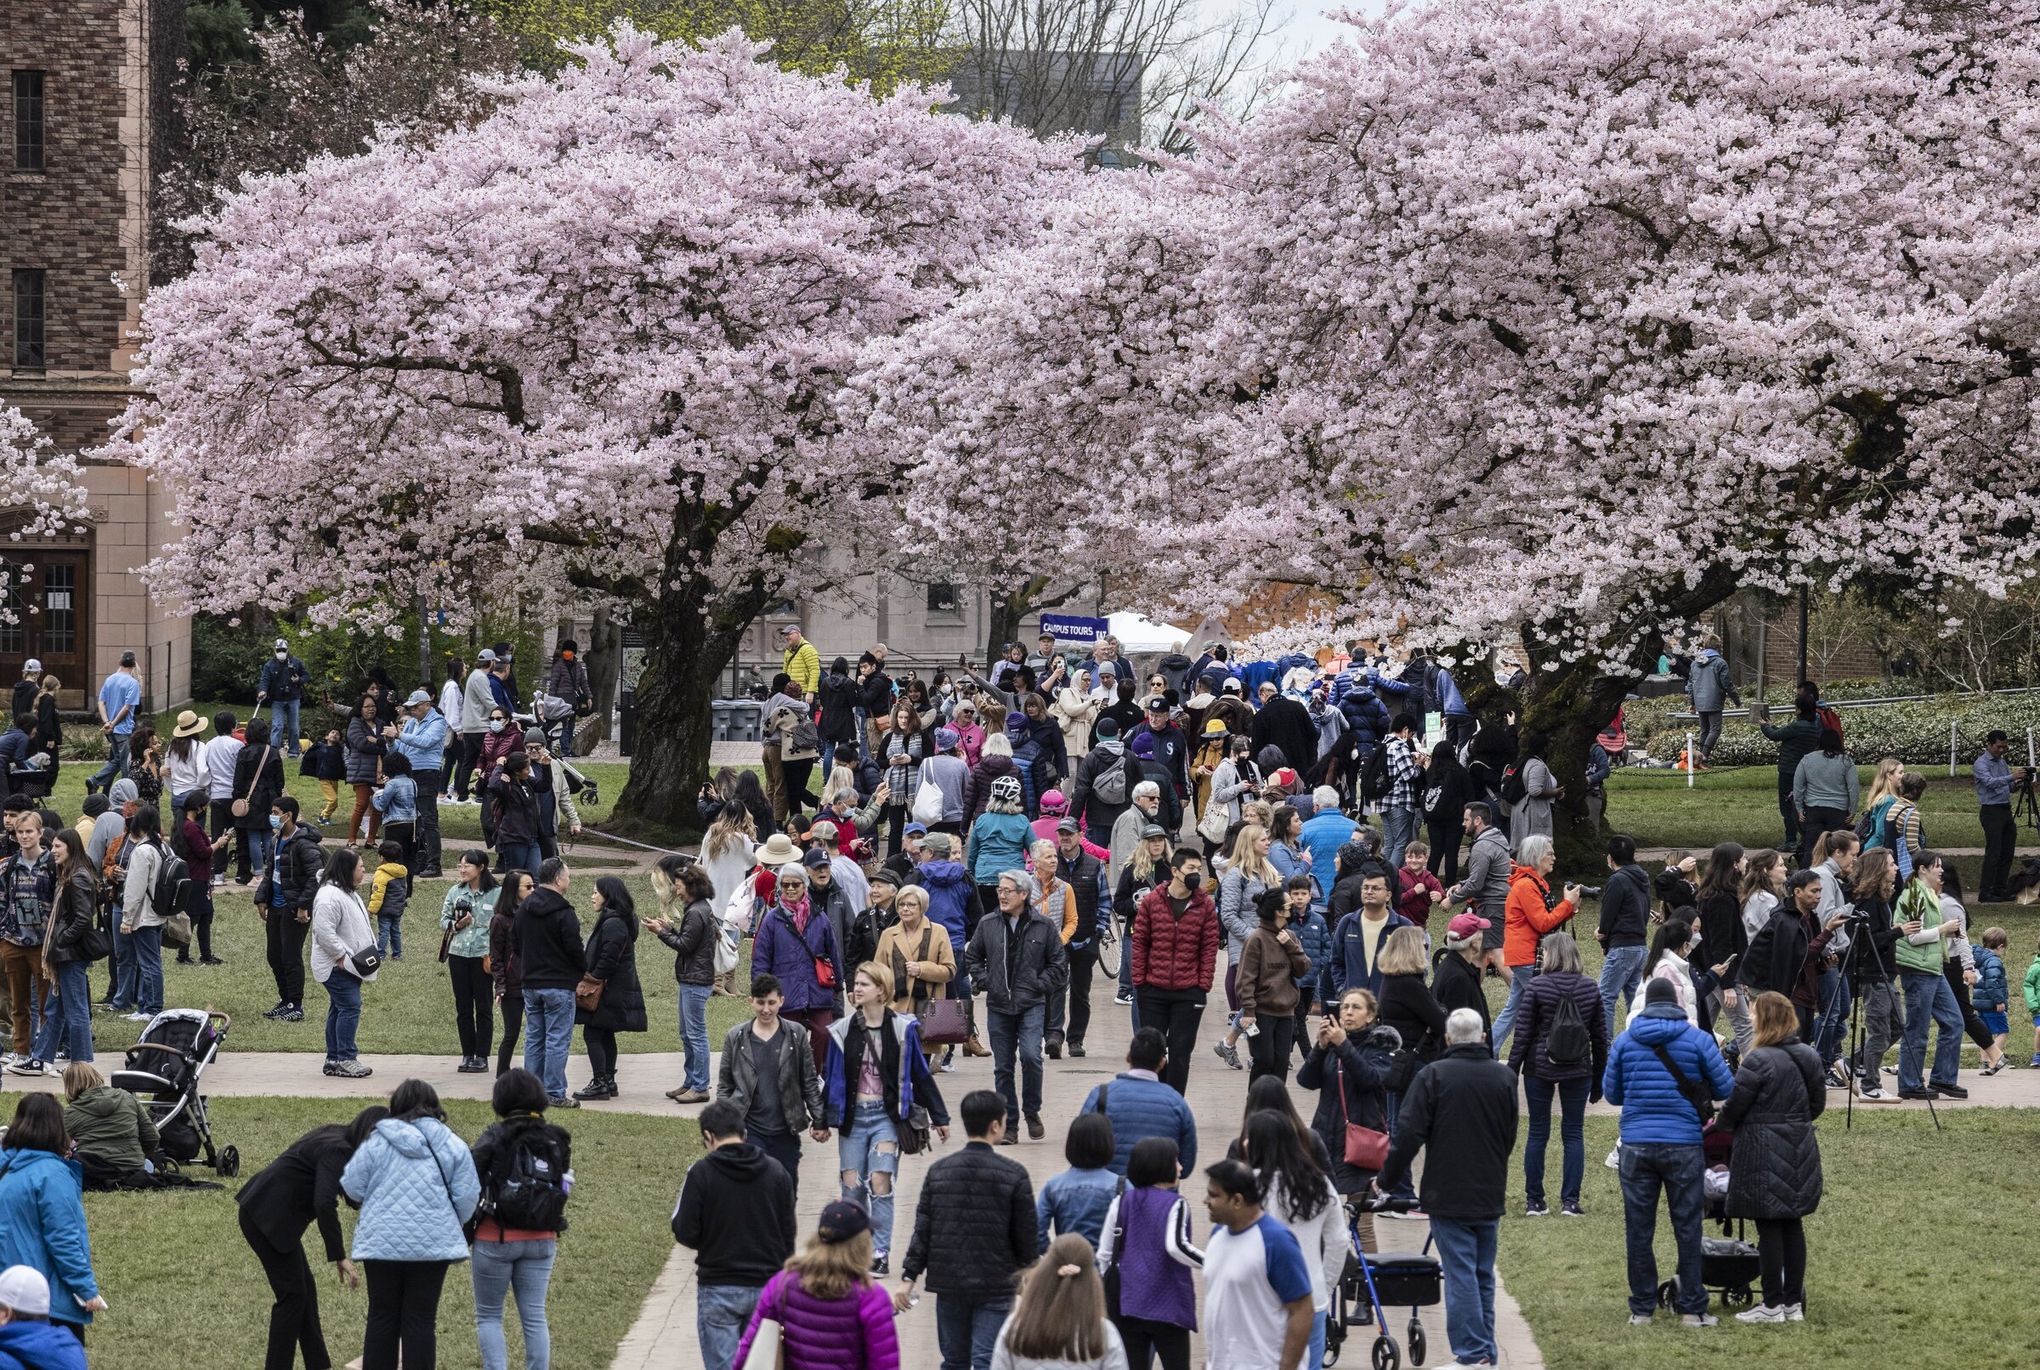 Celebration of Blossoms « The Healthy Planet